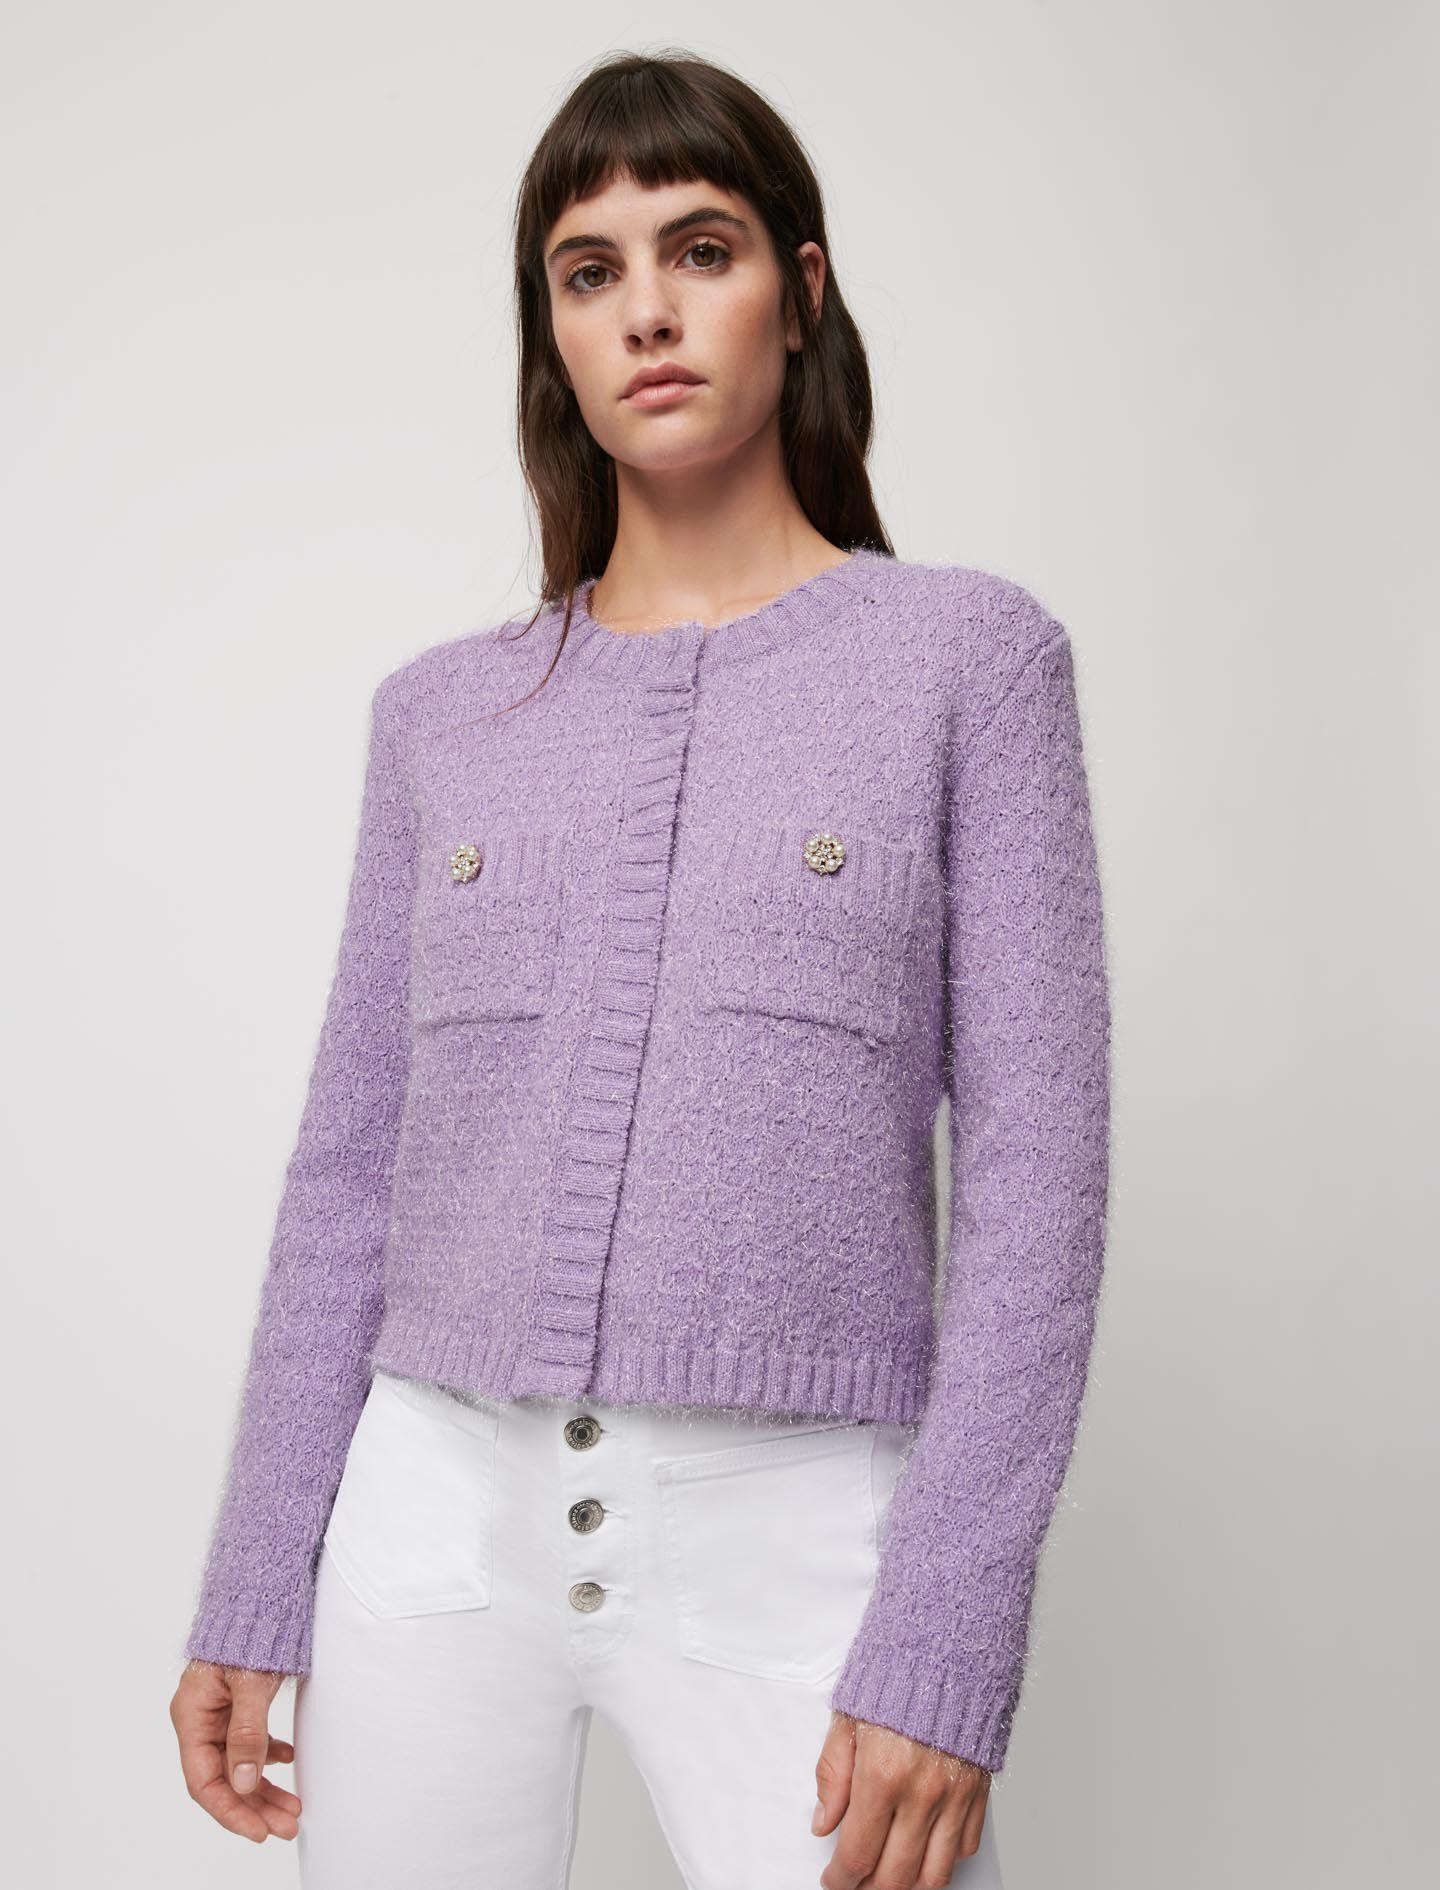 Maje Cardigan With Jewel Buttons in Purple | Lyst